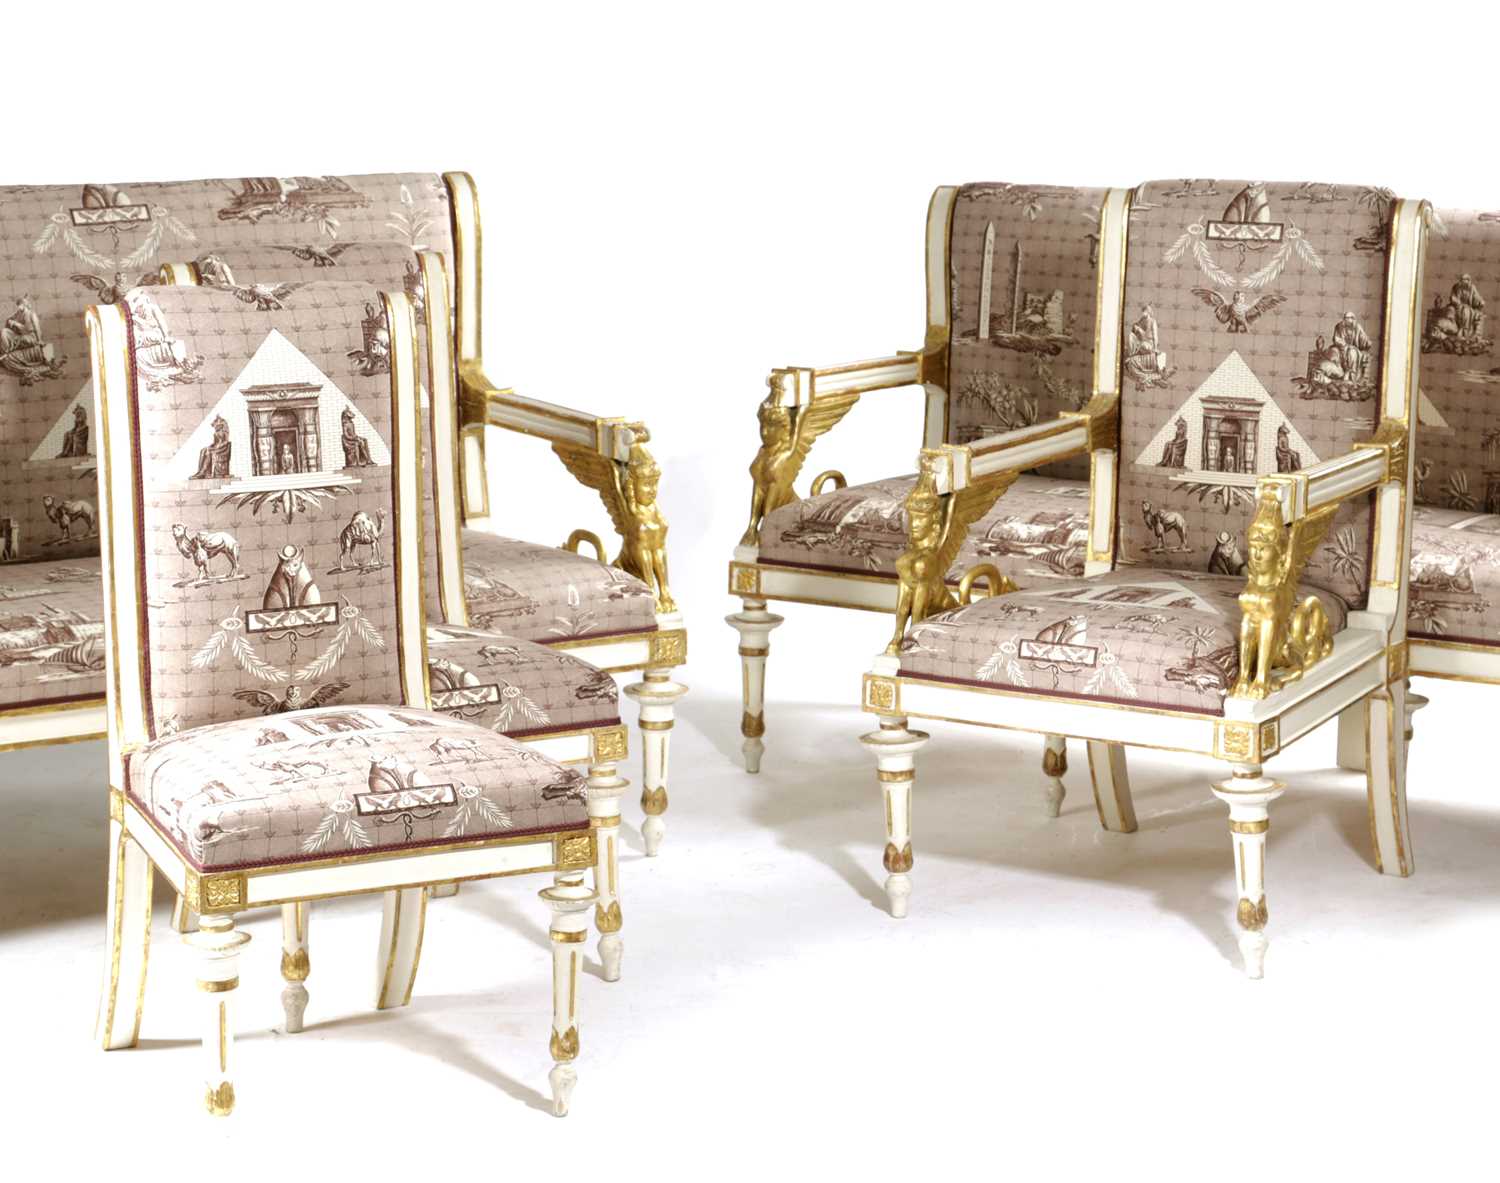 AN ITALIAN PAINTED AND PARCEL GILT SALON SUITE IN EGYPTIAN REVIVAL STYLE, LATE 19TH / EARLY 20TH